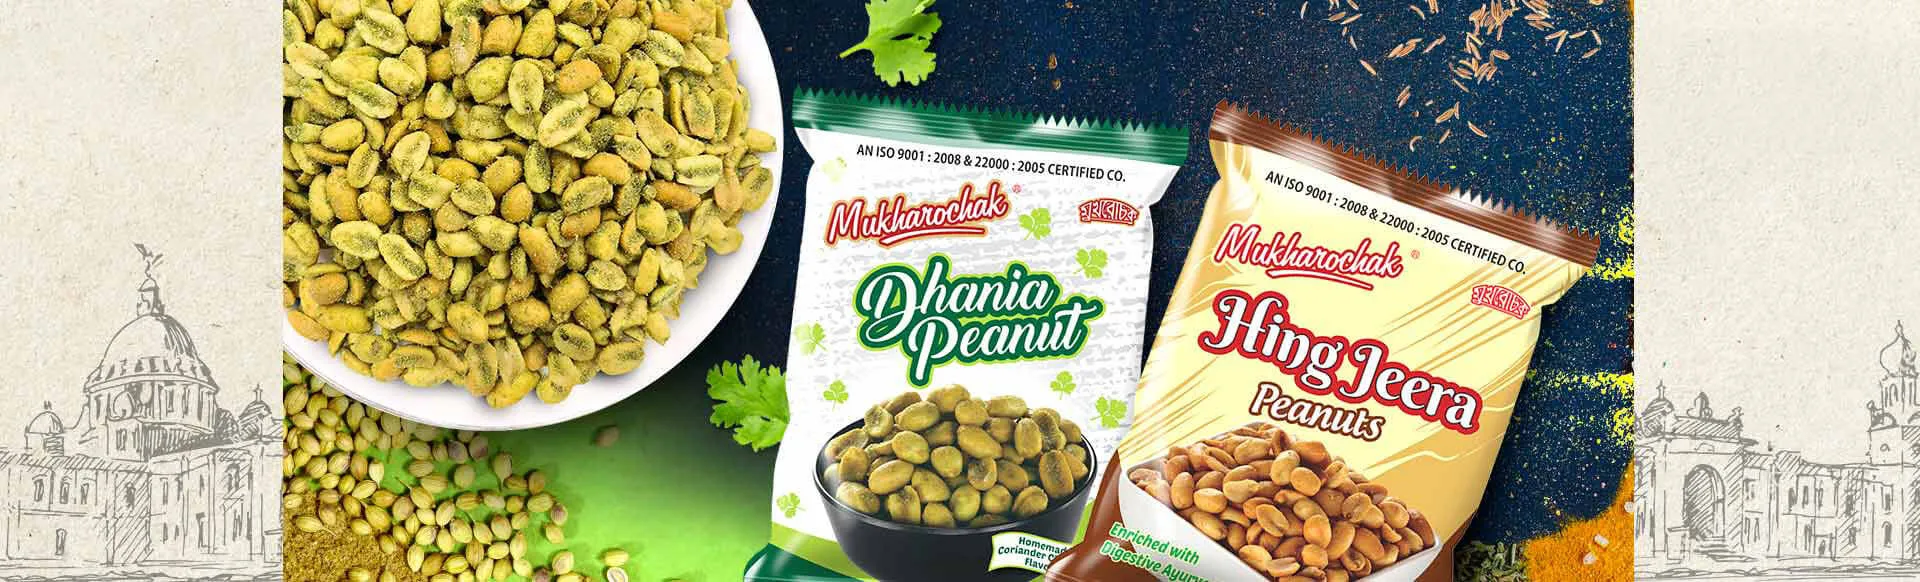 Mukharochak desktop banner image containing a bowl full of dhania peanut, packets of hing jeera peanuts, and dhania peanut